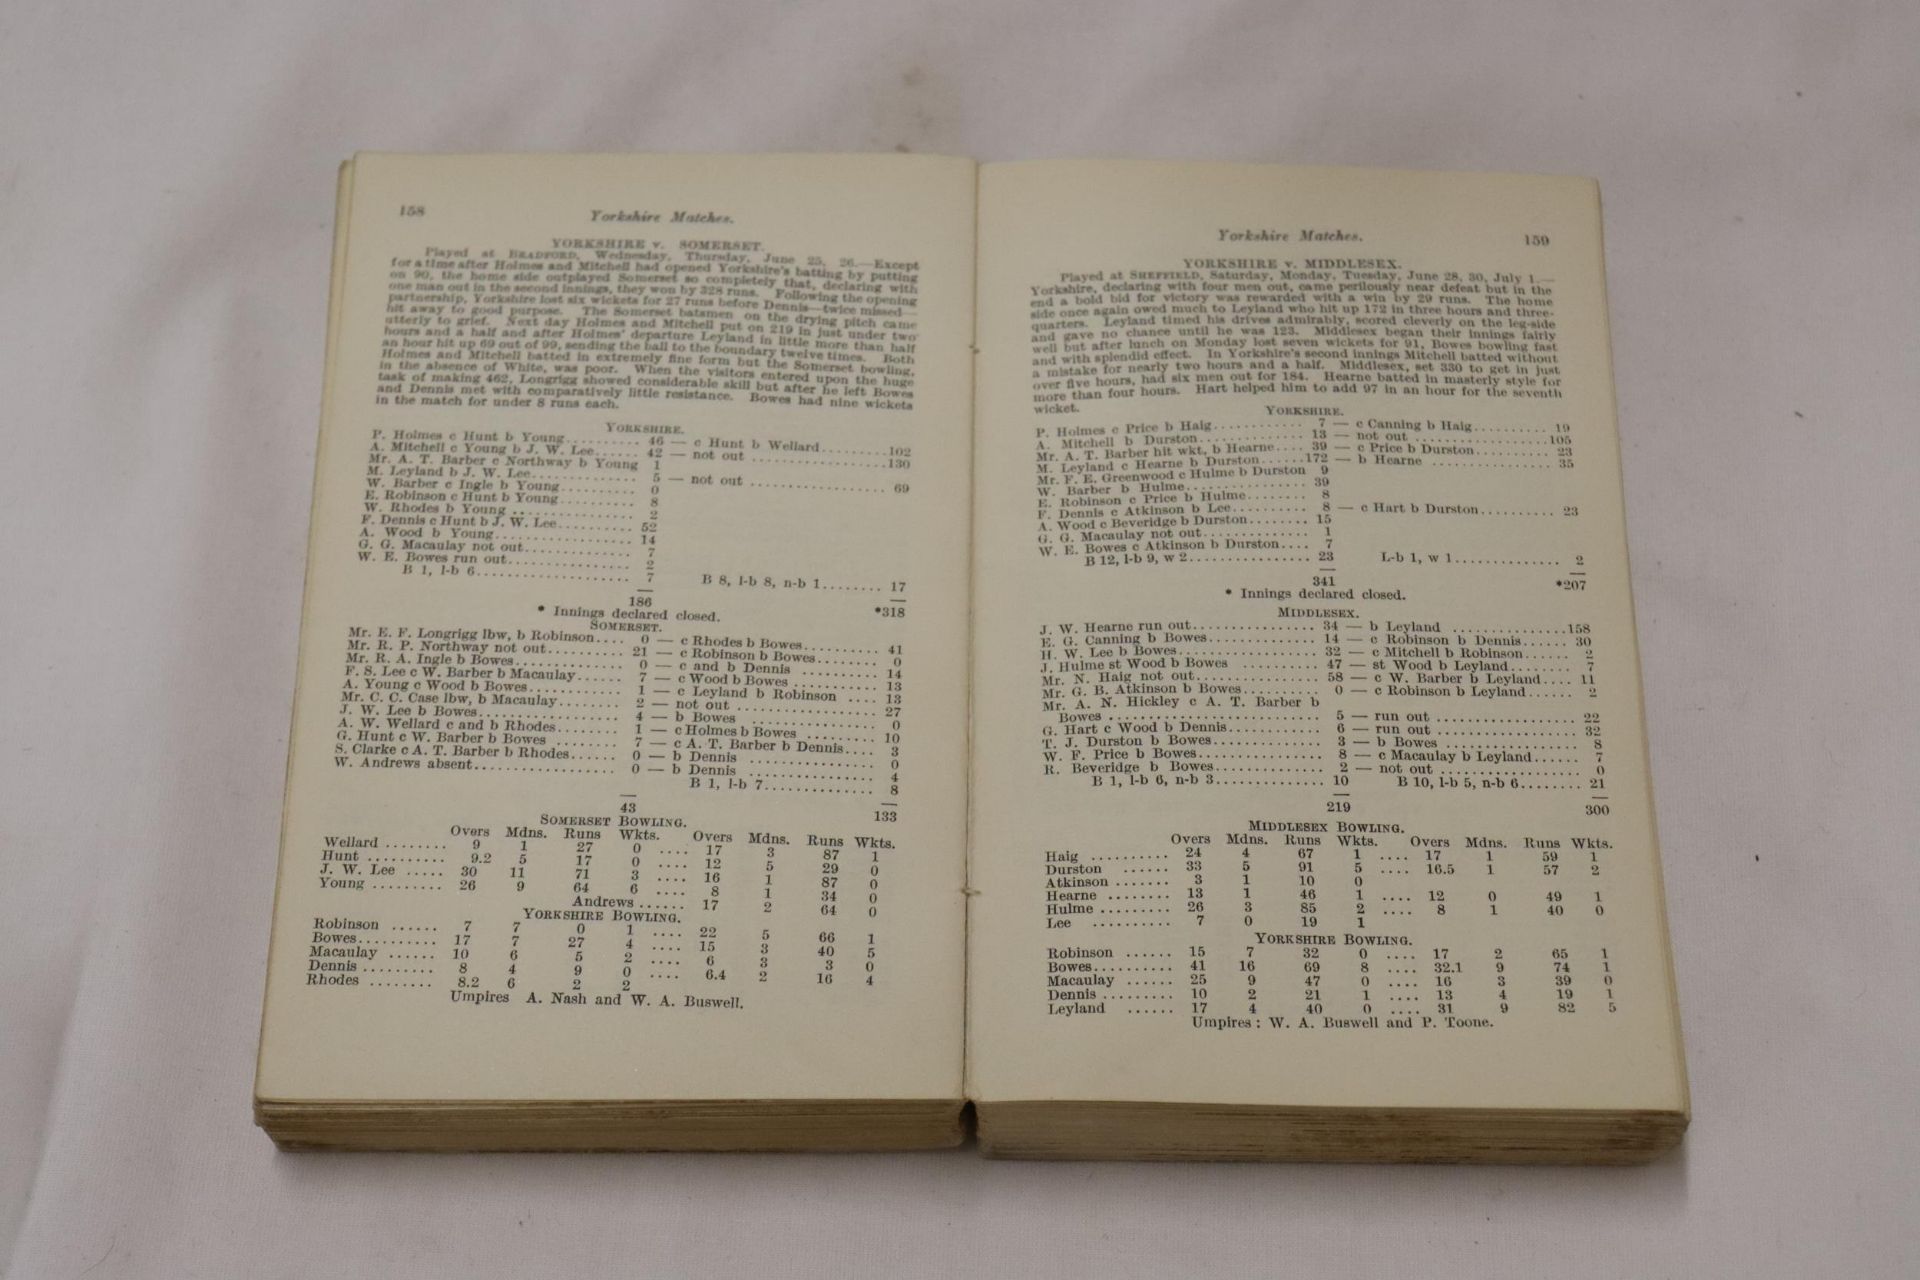 A 1931 COPY OF WISDEN'S CRICKETER'S ALMANACK. THIS COPY IS IN GOOD USED CONDITION, MISSING A SMALL - Image 4 of 4